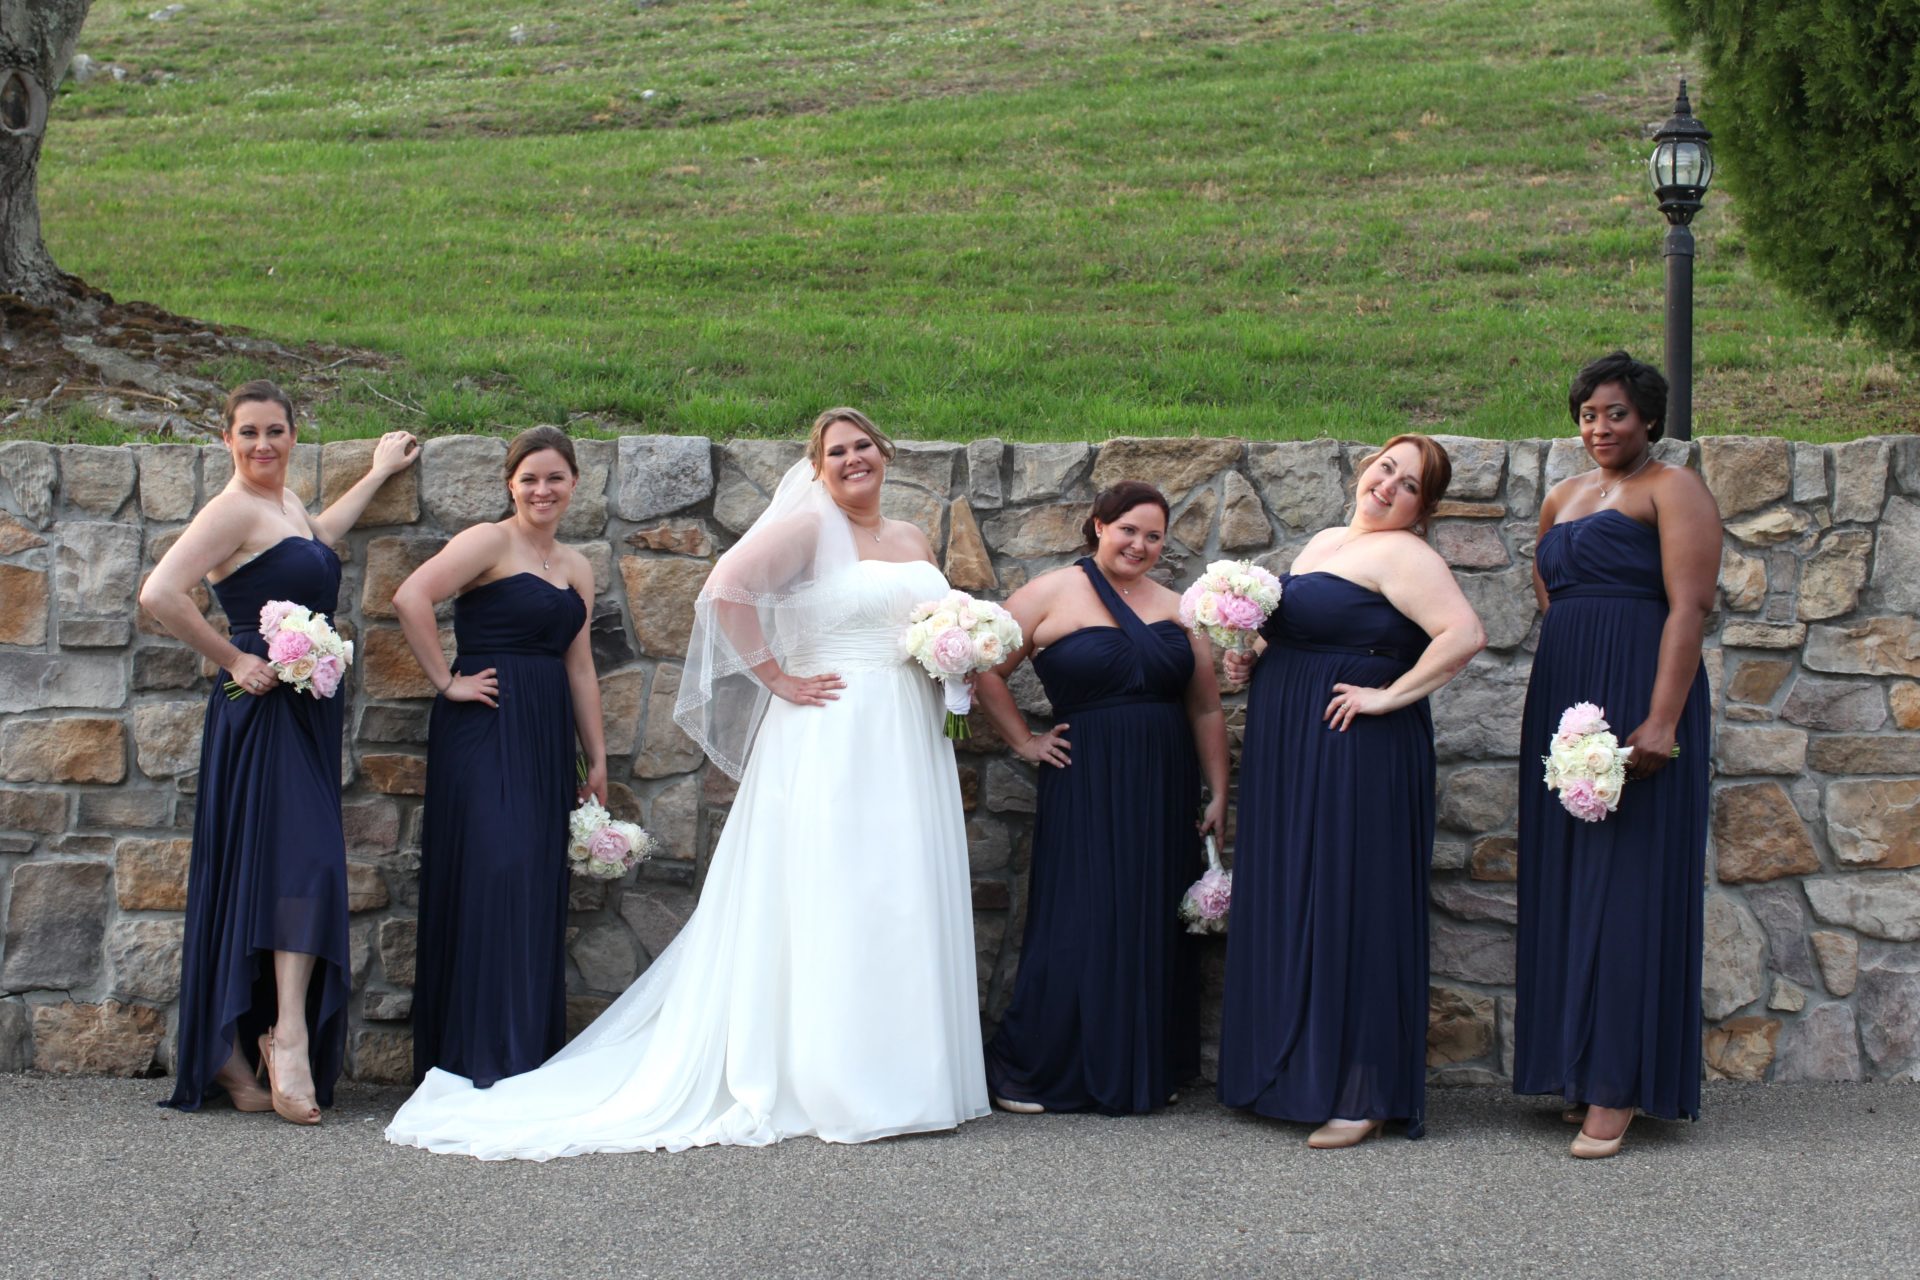 Bridesmaid and bride in front of stone wall